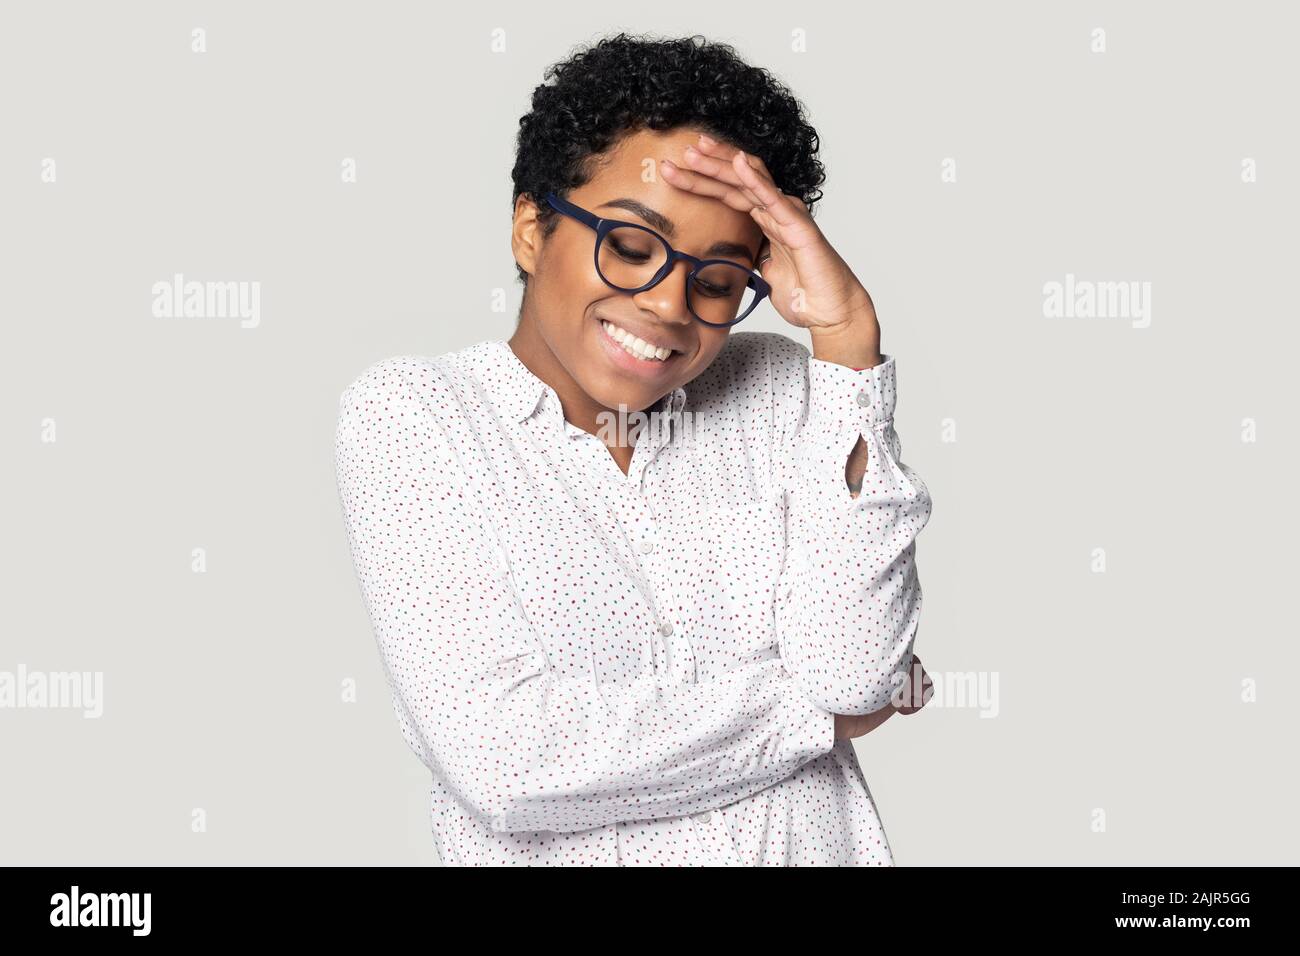 African woman lowers eyes down and looks embarrassed studio shot Stock Photo